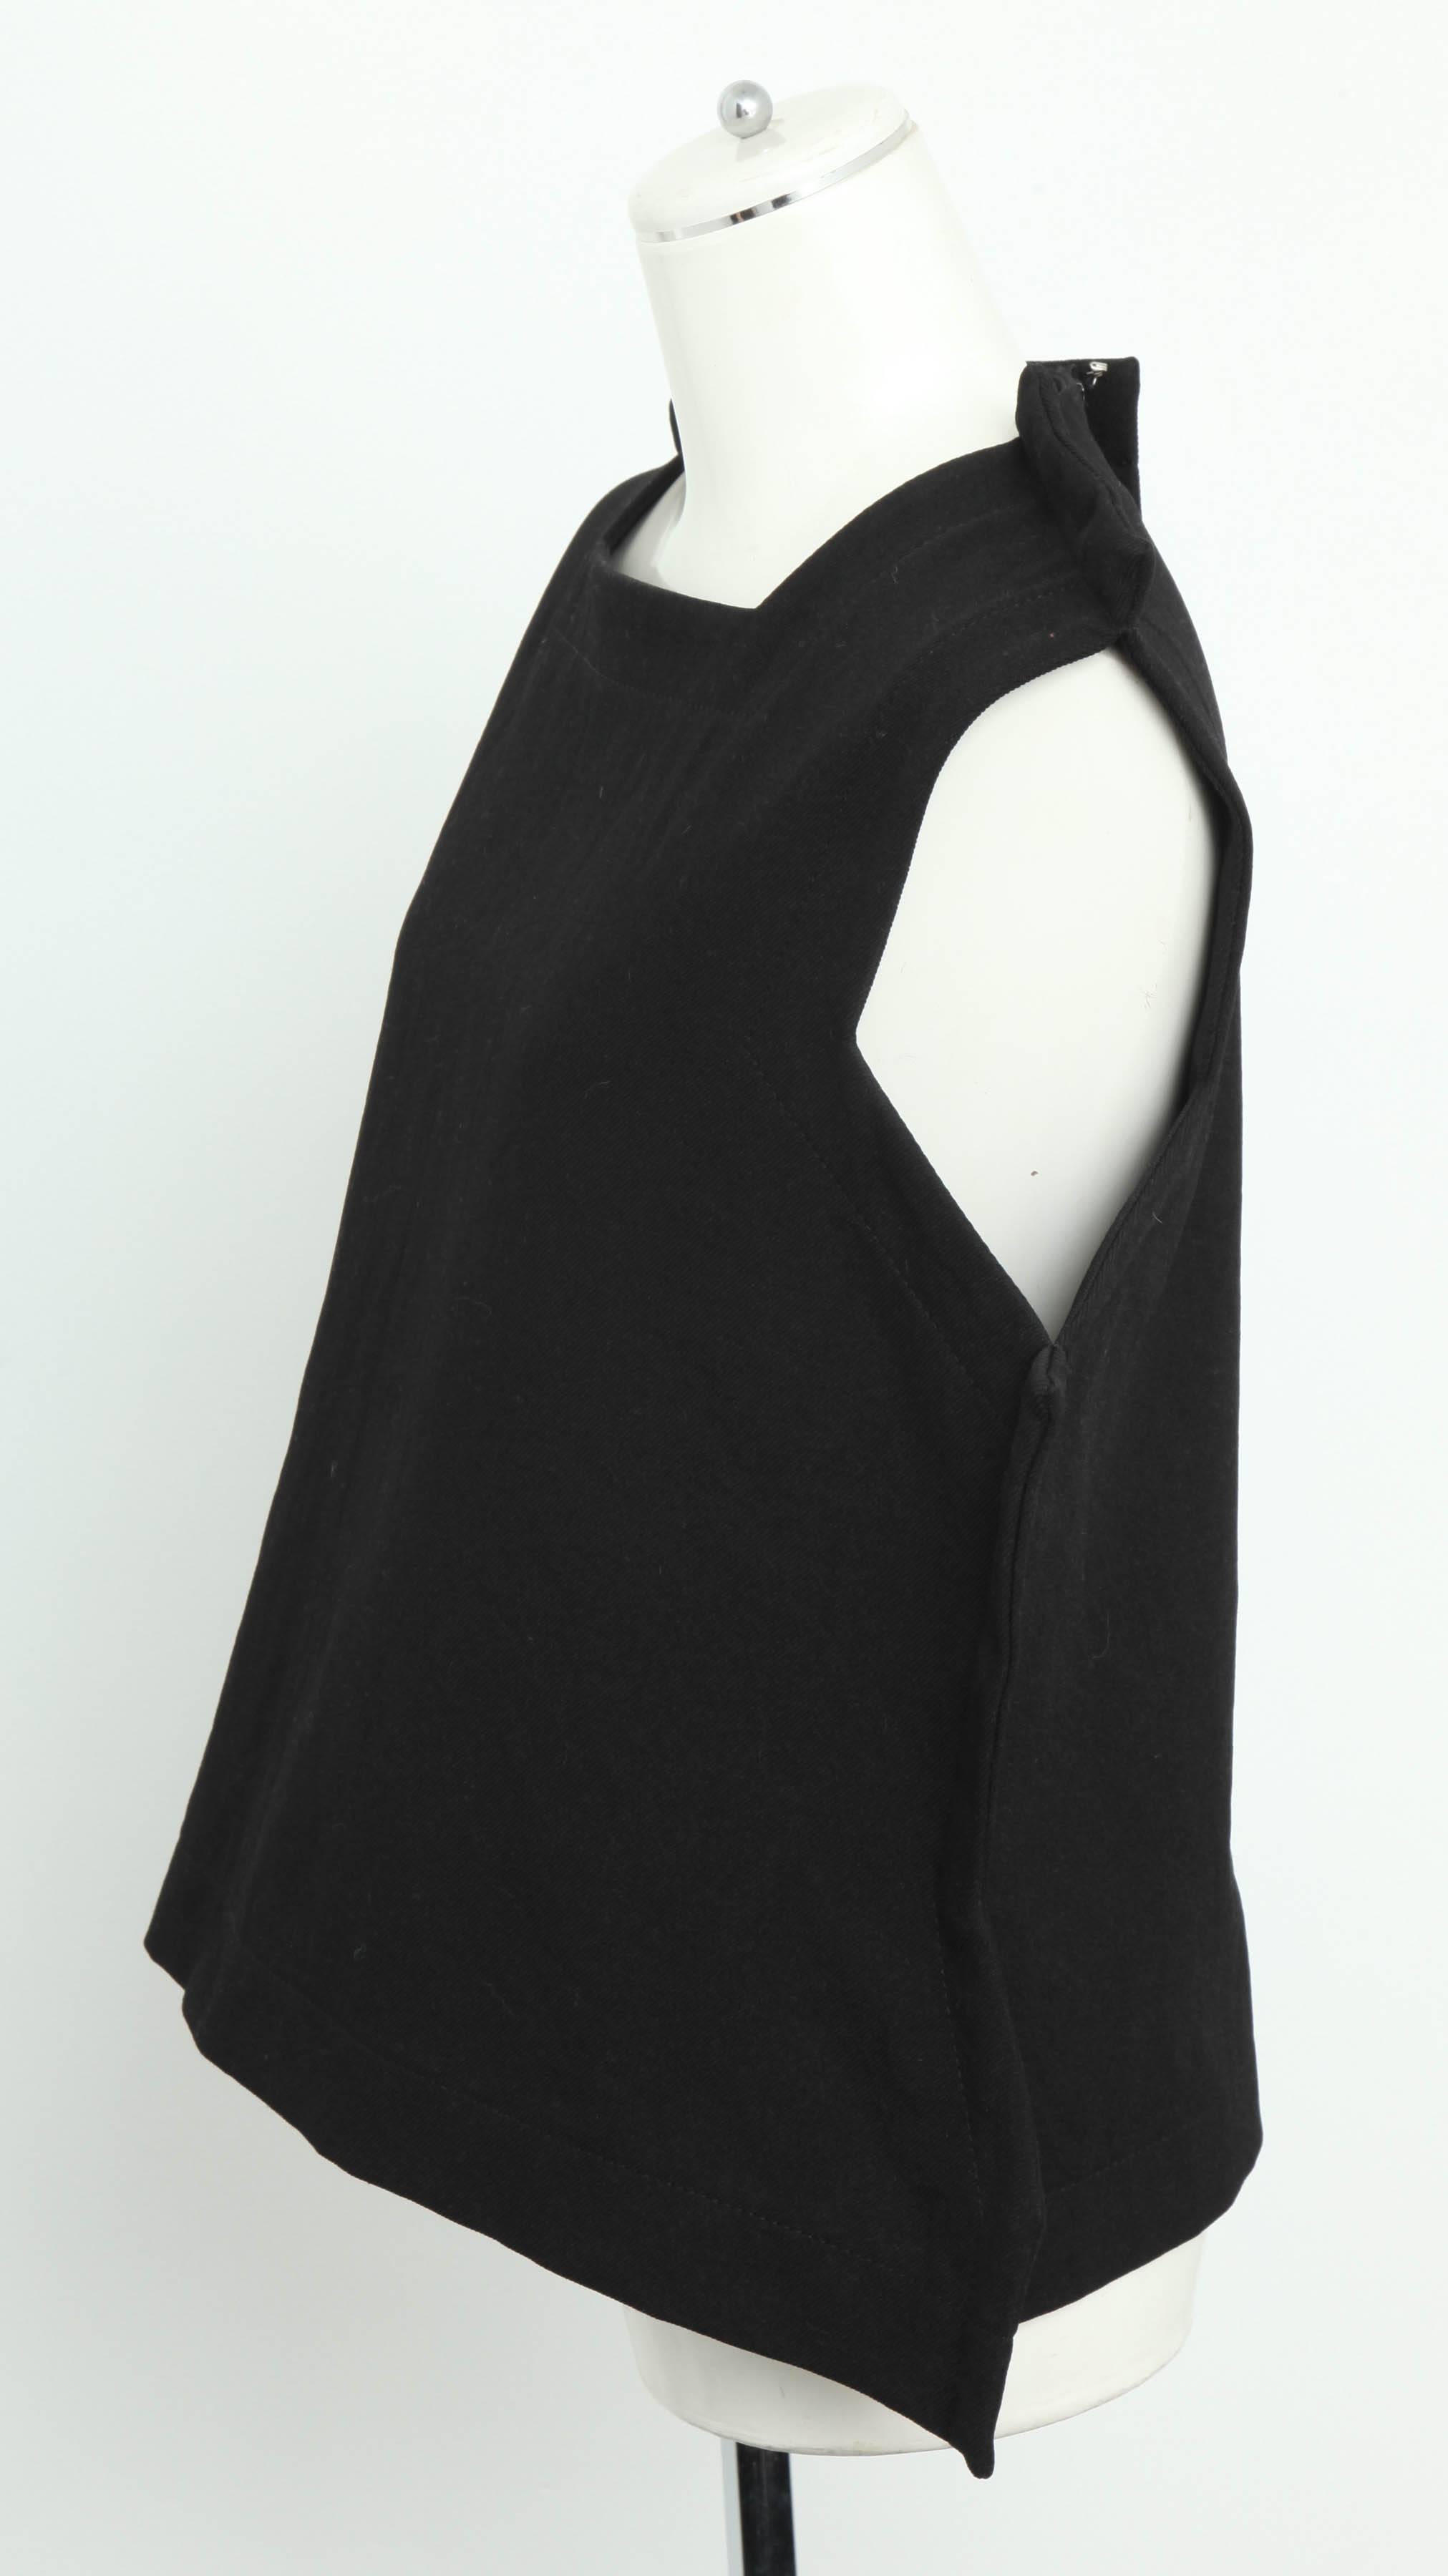 Comme Des Garcons Rare Black Top from 2 Dimensional Collection im Zustand „Gut�“ im Angebot in Chicago, IL